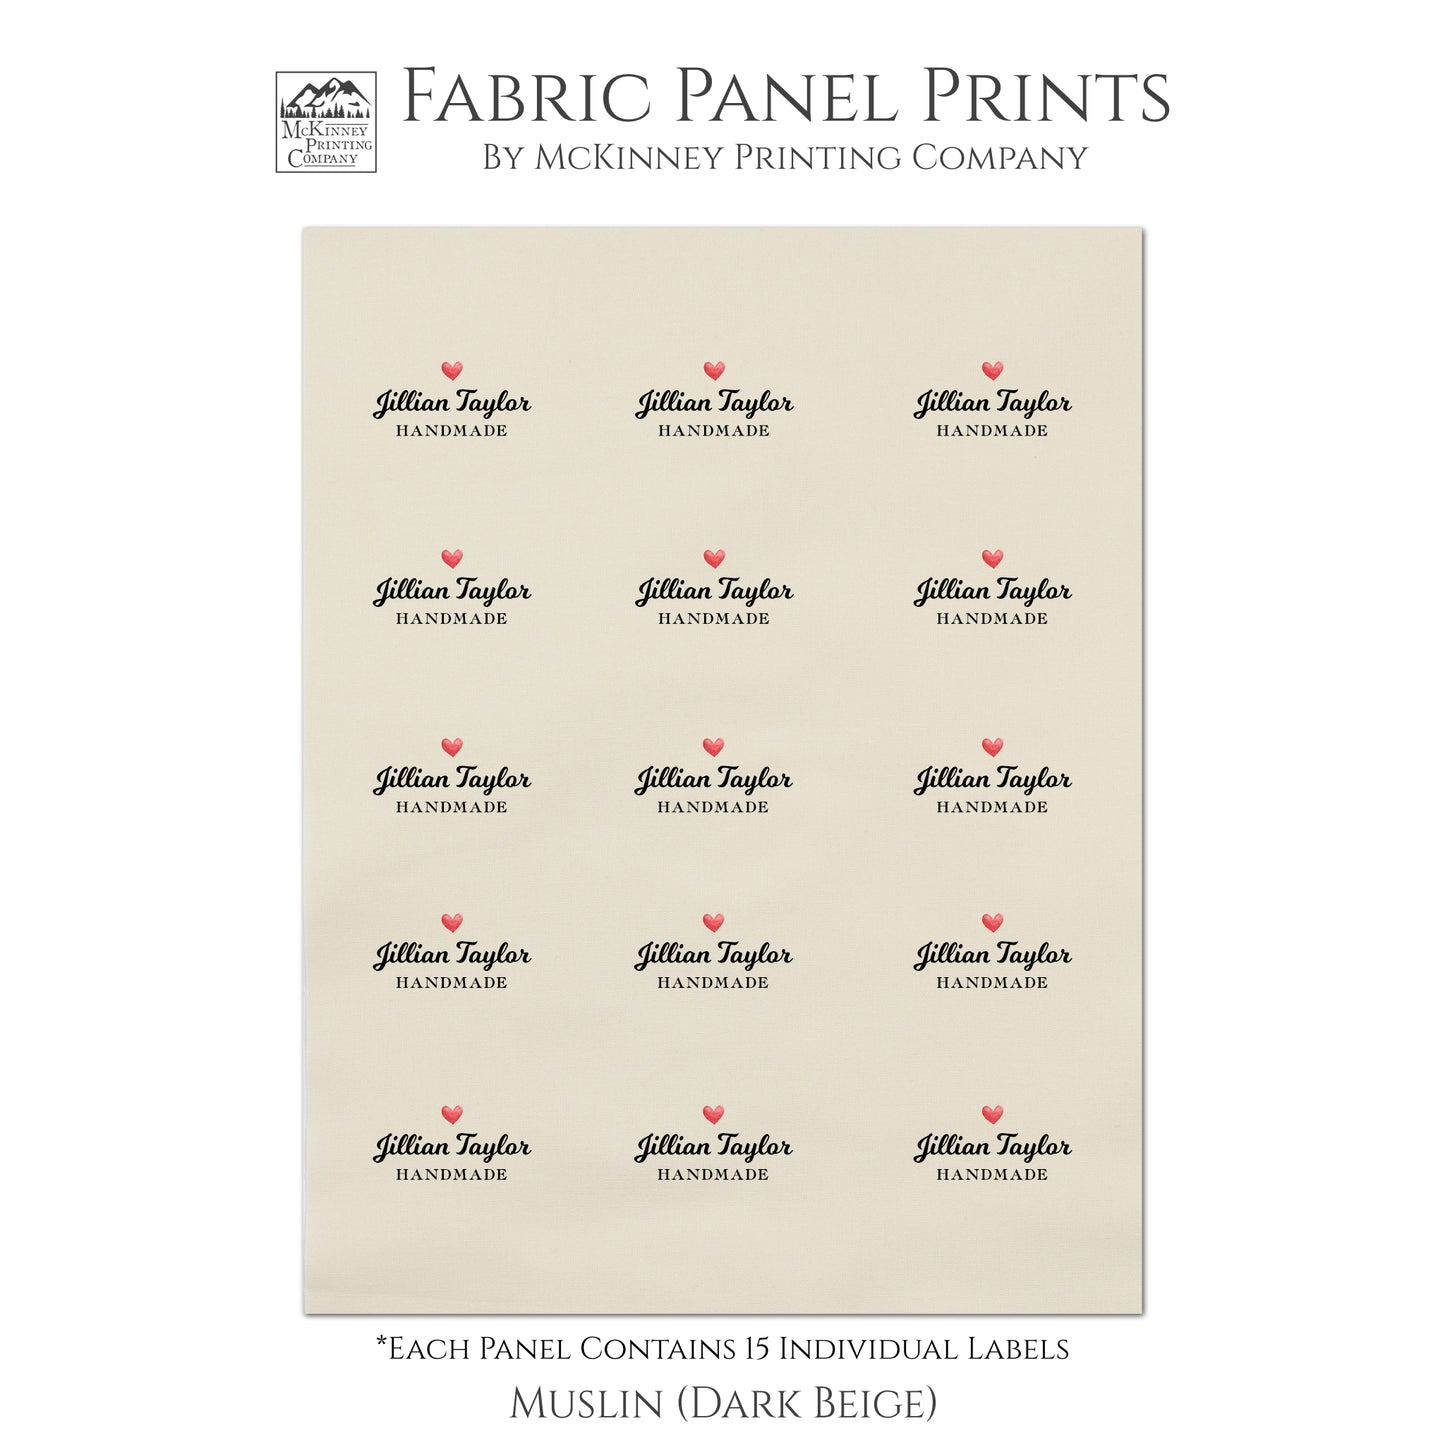 Quilt Labels - Fabric Panel Print for Handmade Sewing and Craft Projects, Supplies and Materials - Muslin